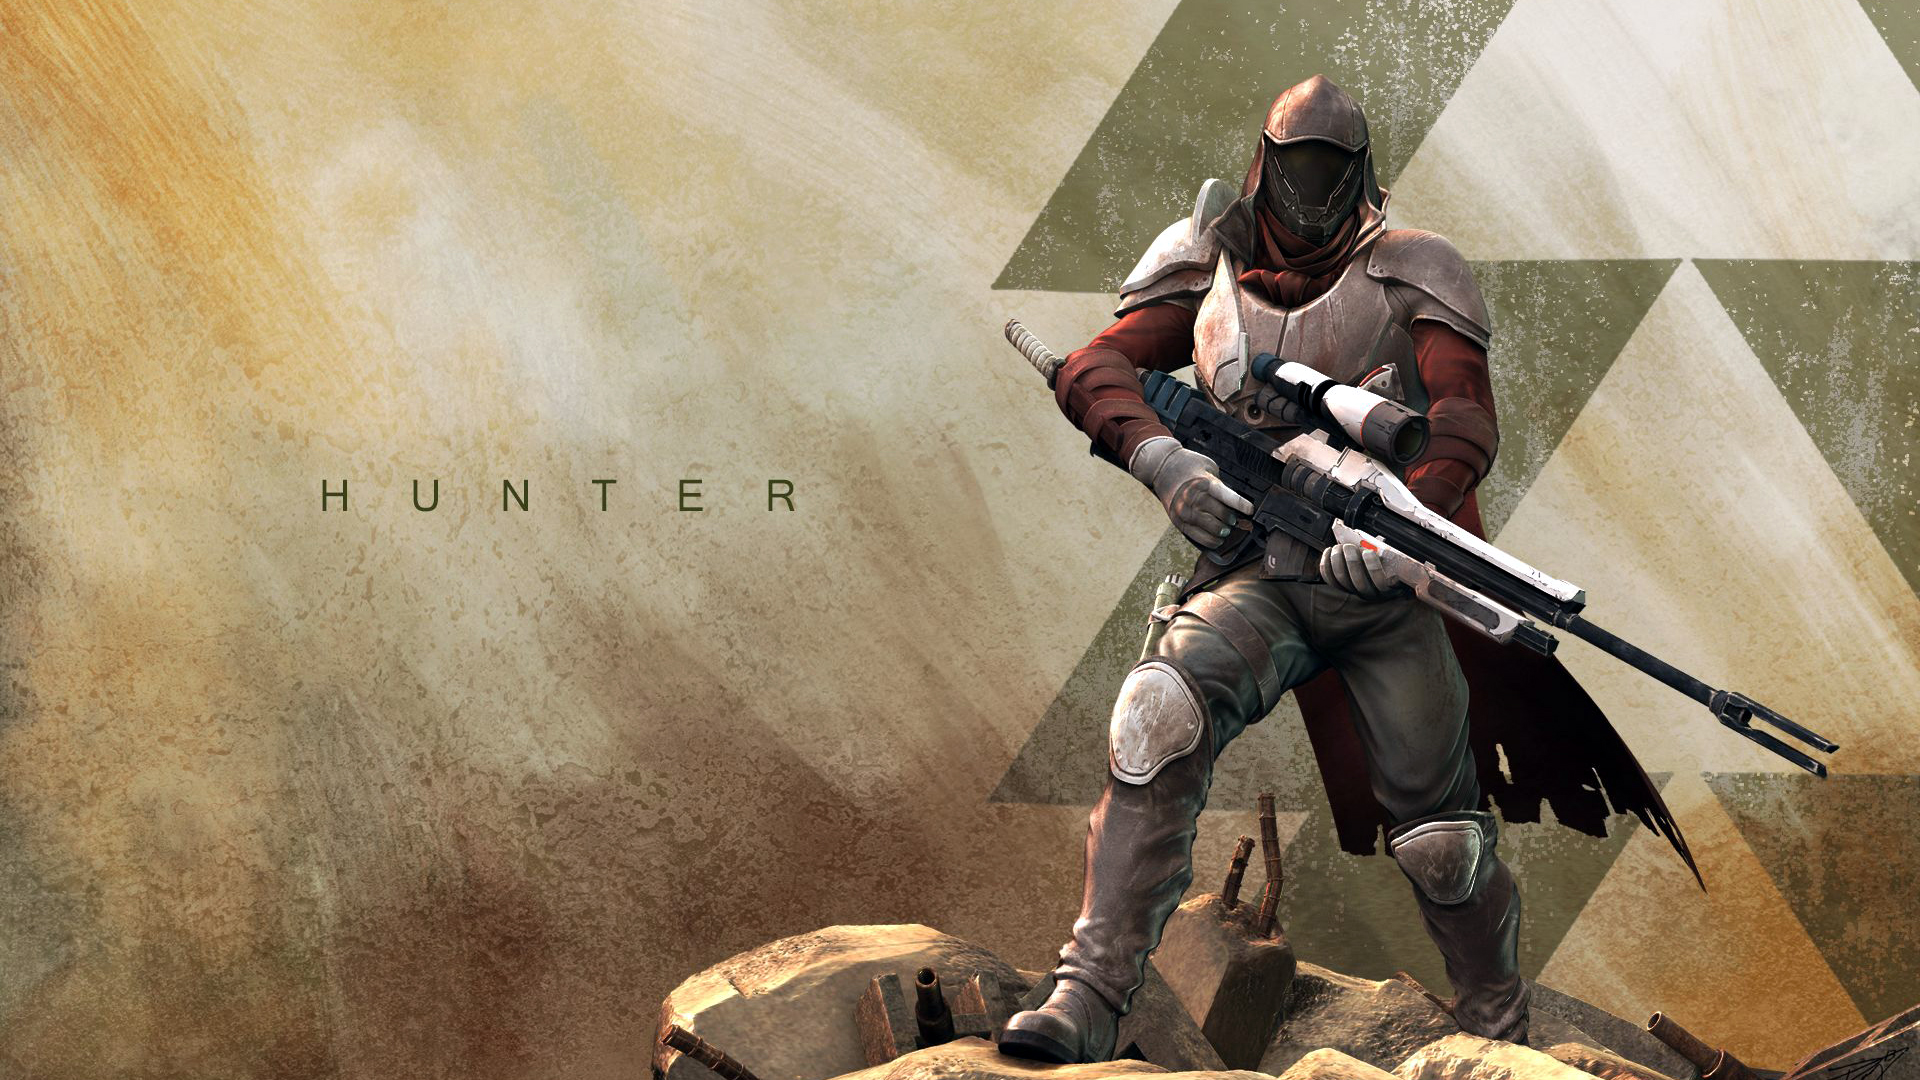 Hunter guardian class Destiny game HD 1920x1080 1080p and compatible